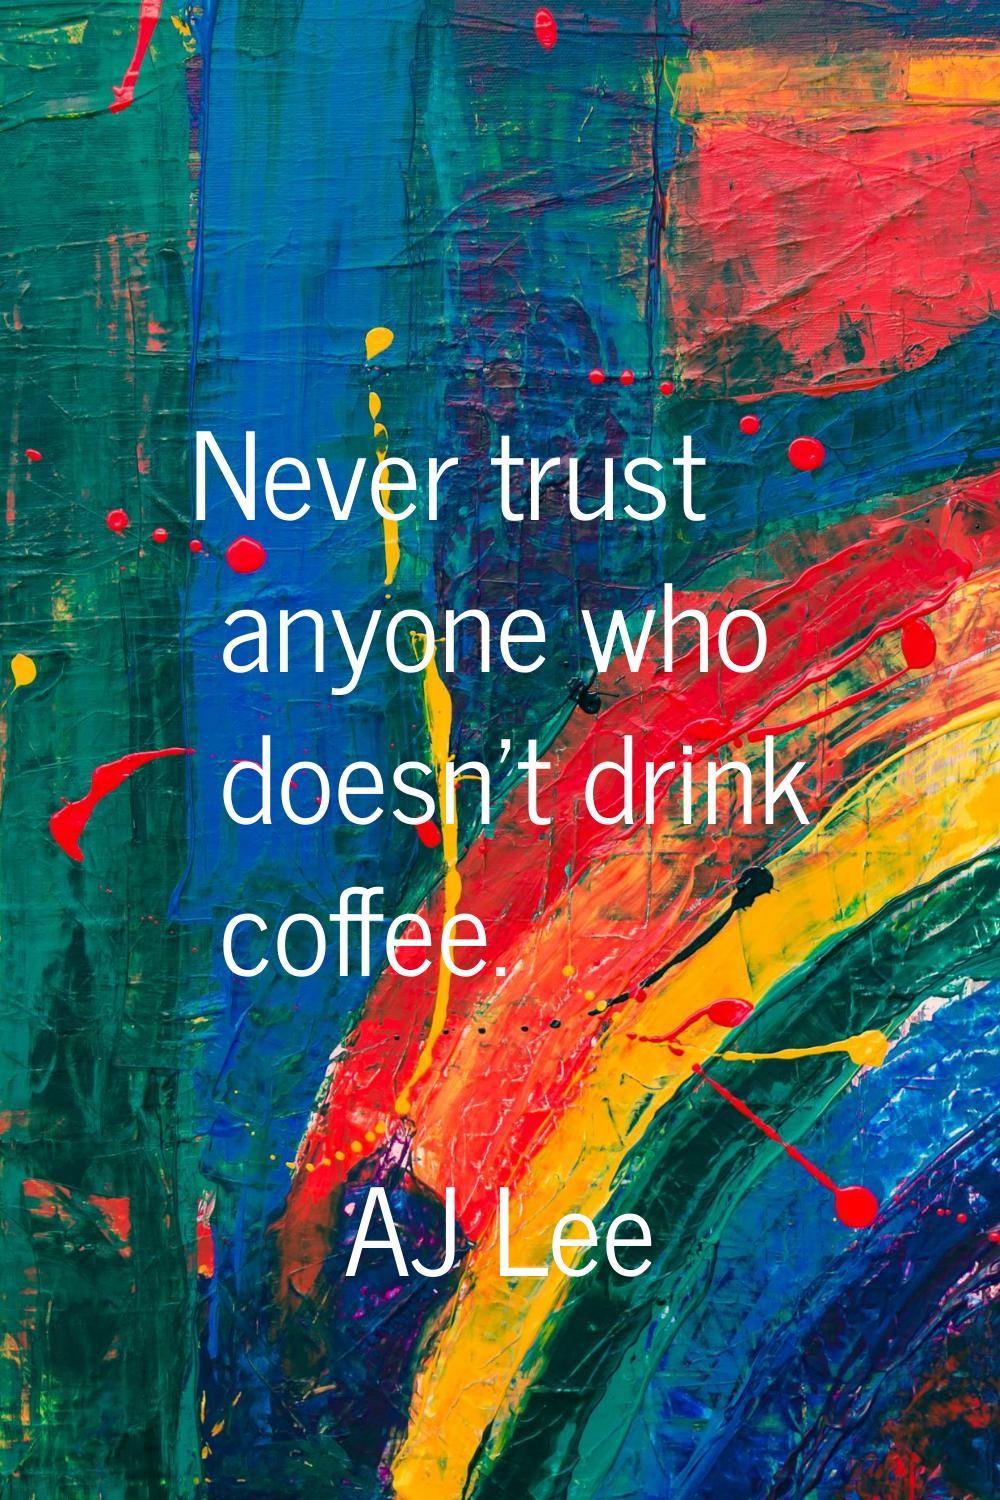 Never trust anyone who doesn't drink coffee.